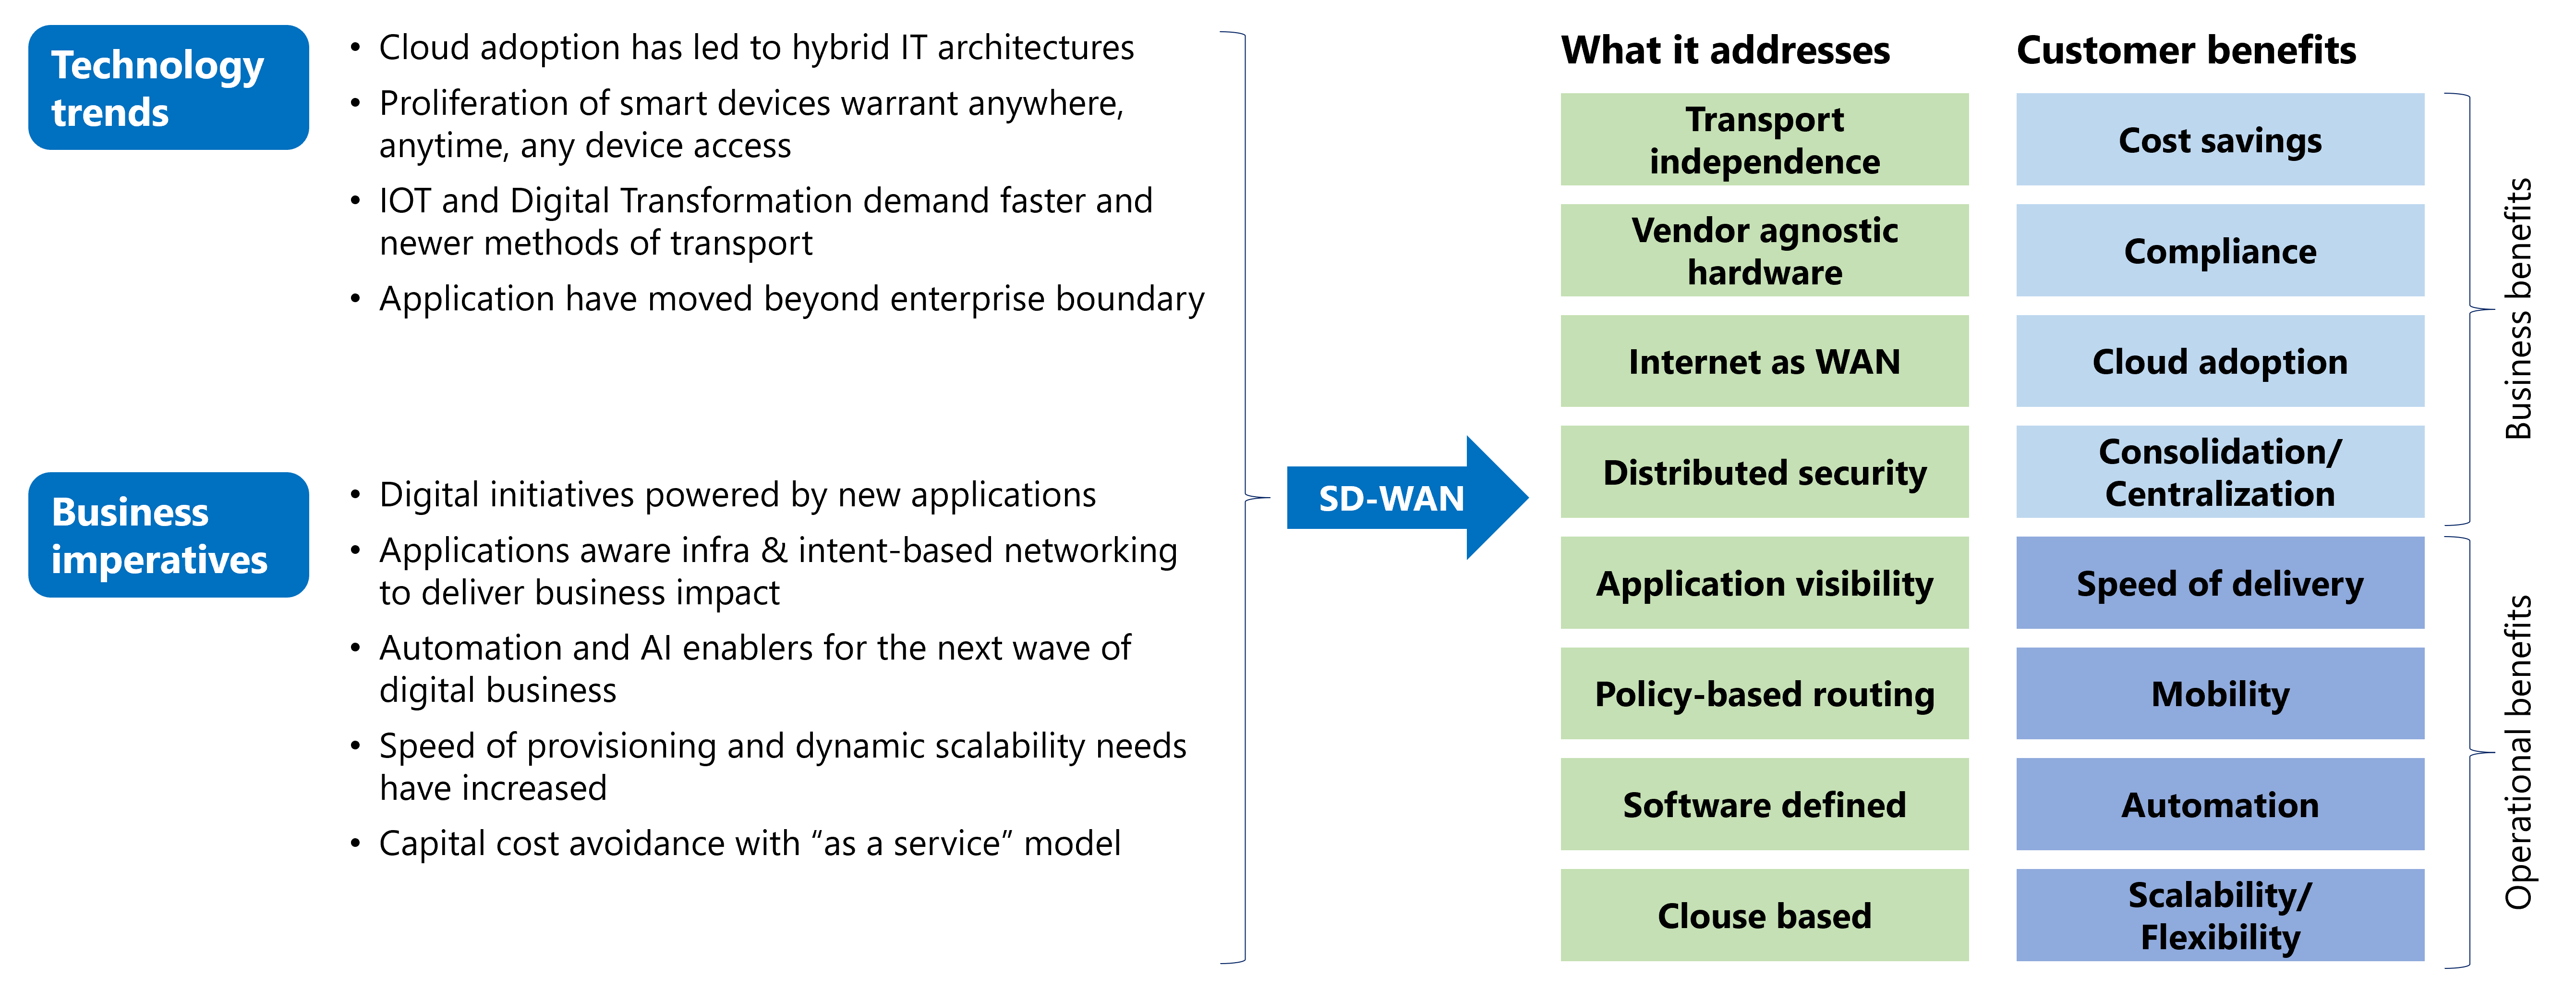 A graphic by Microland showing what SD-WAN addresses and the customer benefits of SD-WAN transformation